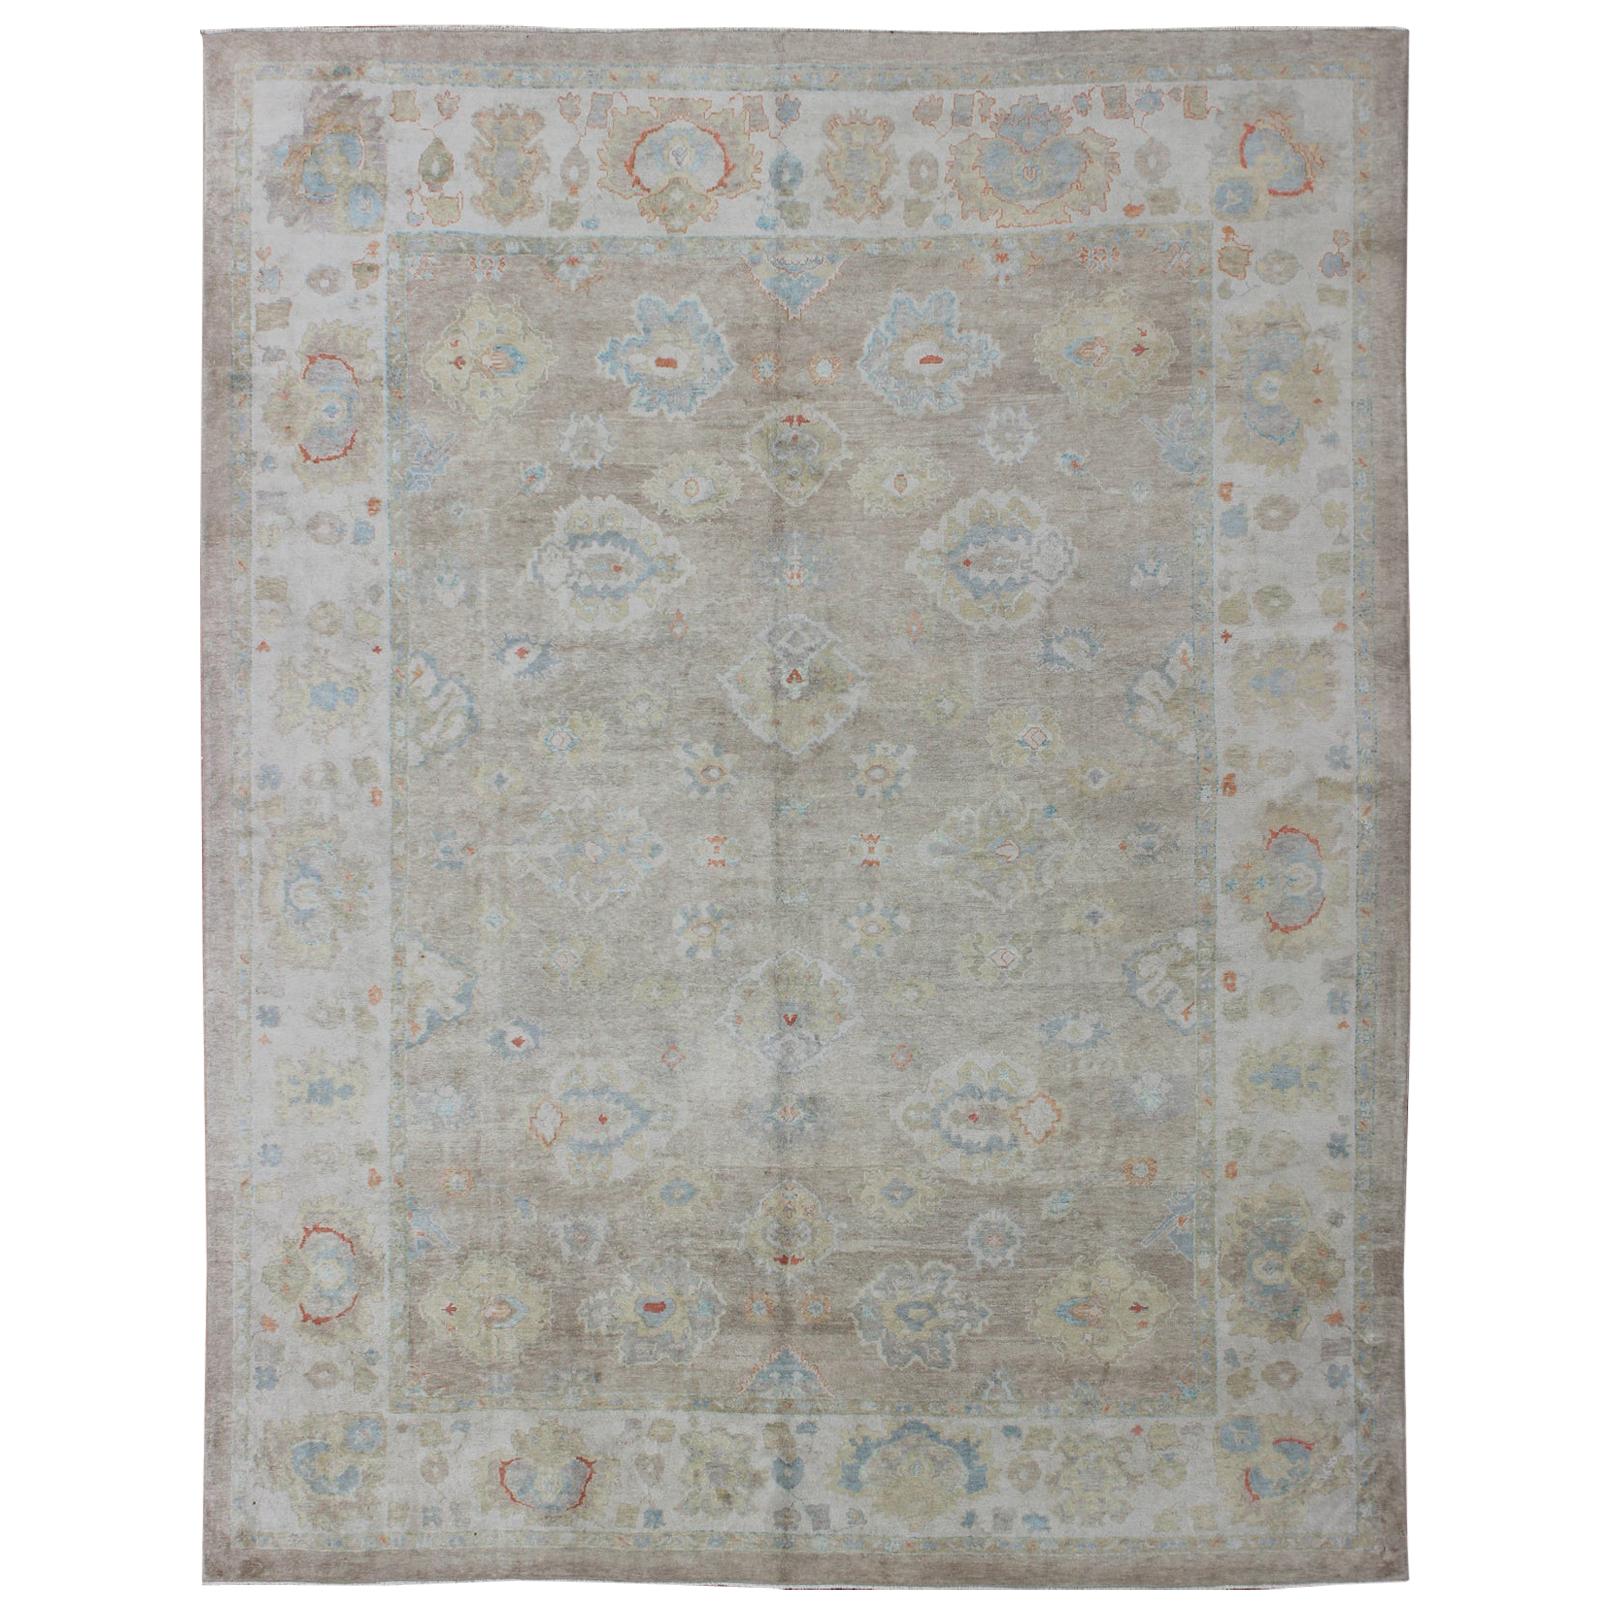 Large Turkish Oushak Rug with Neutral Color Palette and All-Over Flower Design